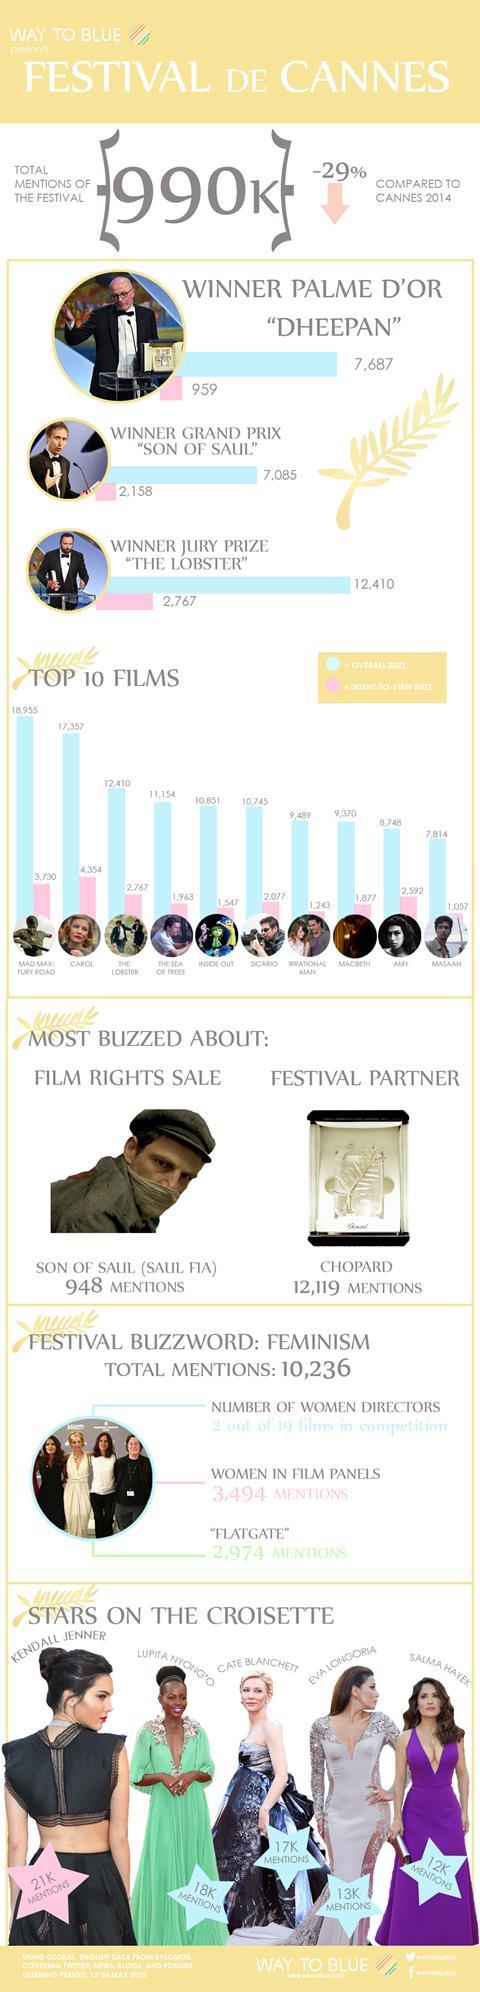 Cannes 2015 infographic